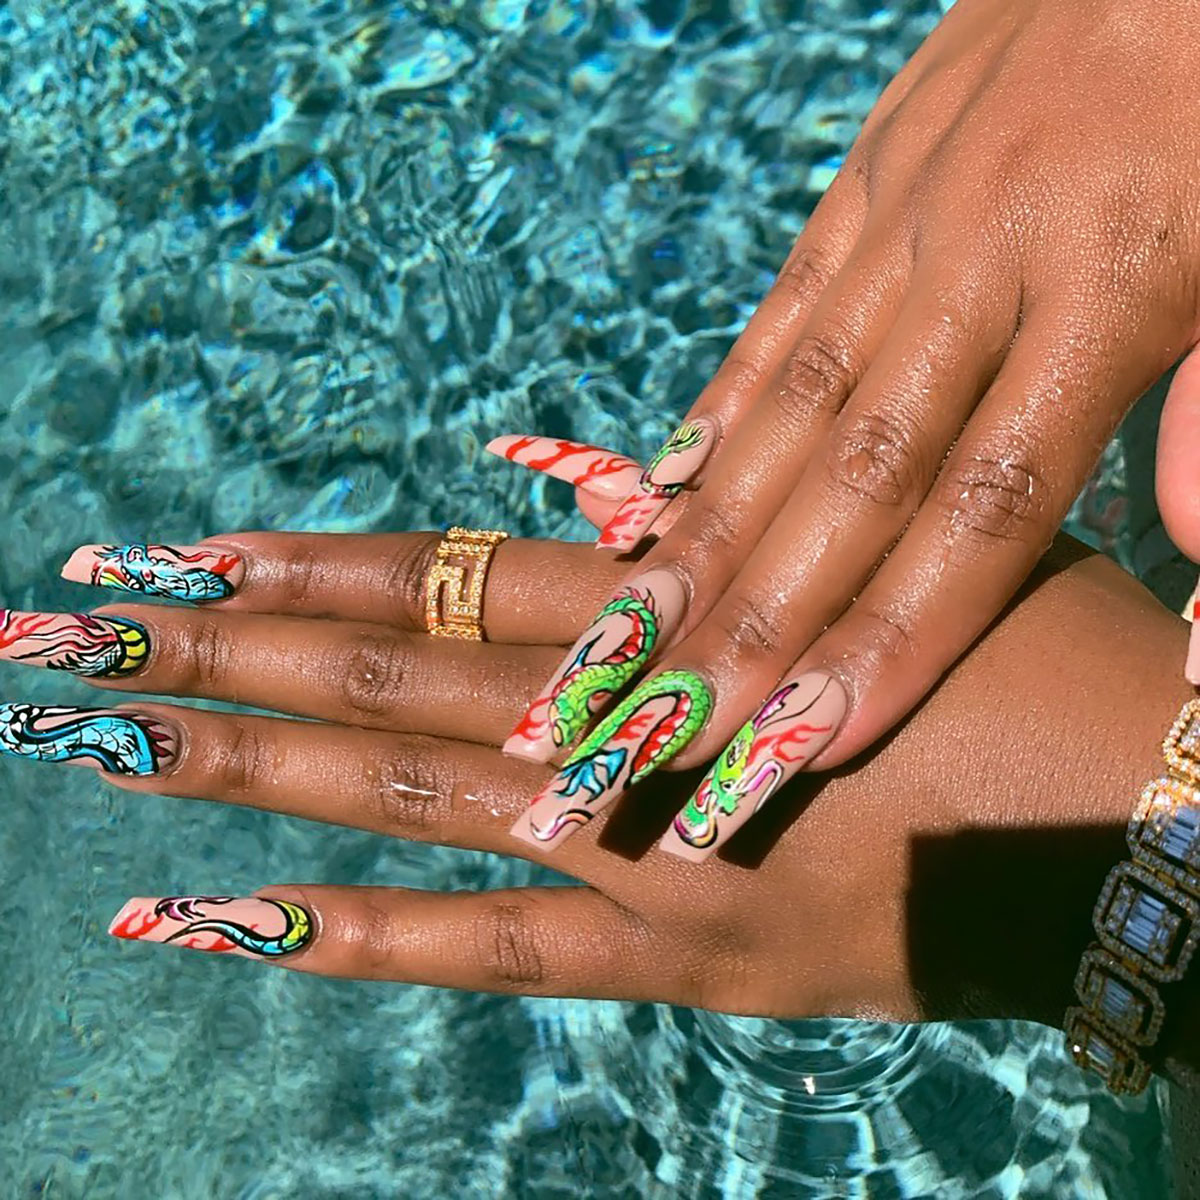 Kylie Jenner's 20 Best Nail Looks Prove She's the Ultimate Manicure Muse